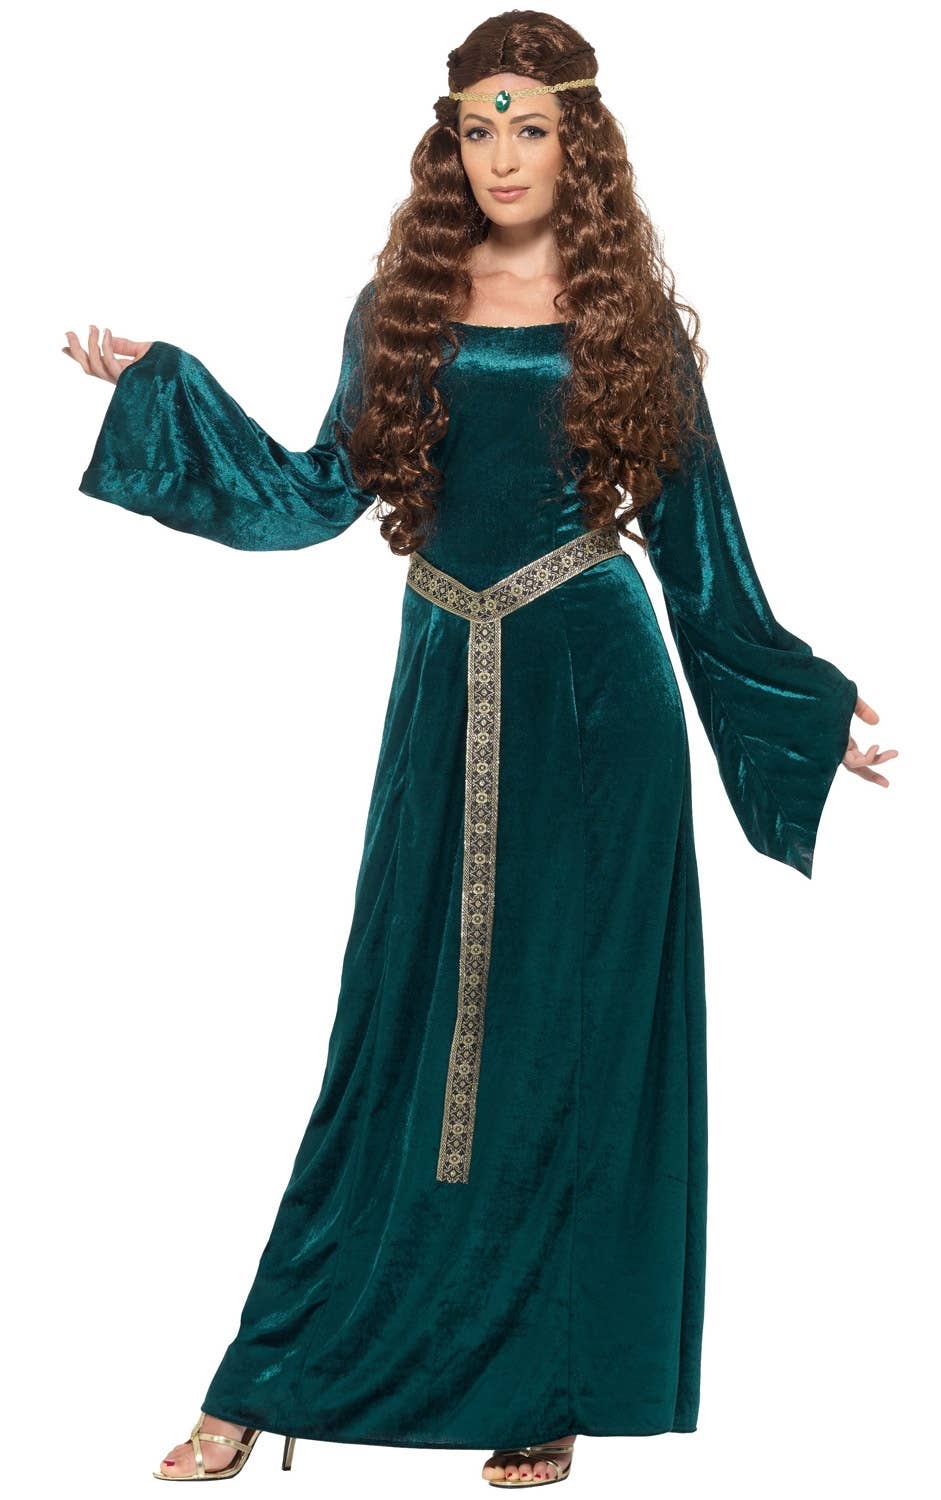 Women's Plus Size Green Medieval Costume Dress - Front Image